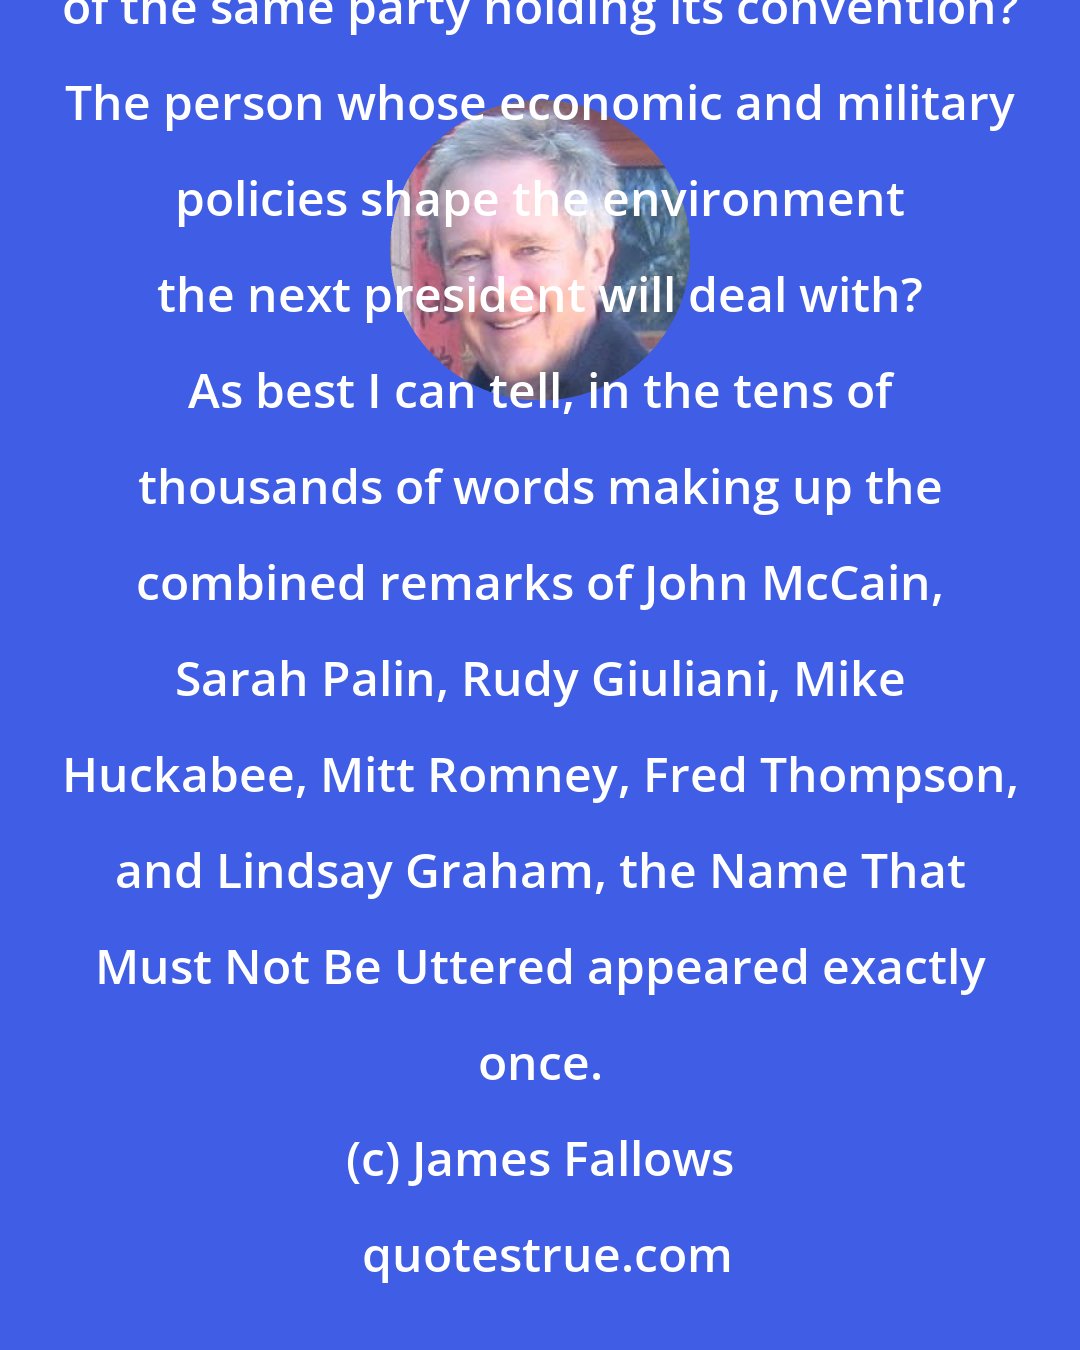 James Fallows: The President? Hmmm, I wonder who that might be? Could it be, perhaps, the sitting two-term incumbent of the same party holding its convention? The person whose economic and military policies shape the environment the next president will deal with? As best I can tell, in the tens of thousands of words making up the combined remarks of John McCain, Sarah Palin, Rudy Giuliani, Mike Huckabee, Mitt Romney, Fred Thompson, and Lindsay Graham, the Name That Must Not Be Uttered appeared exactly once.